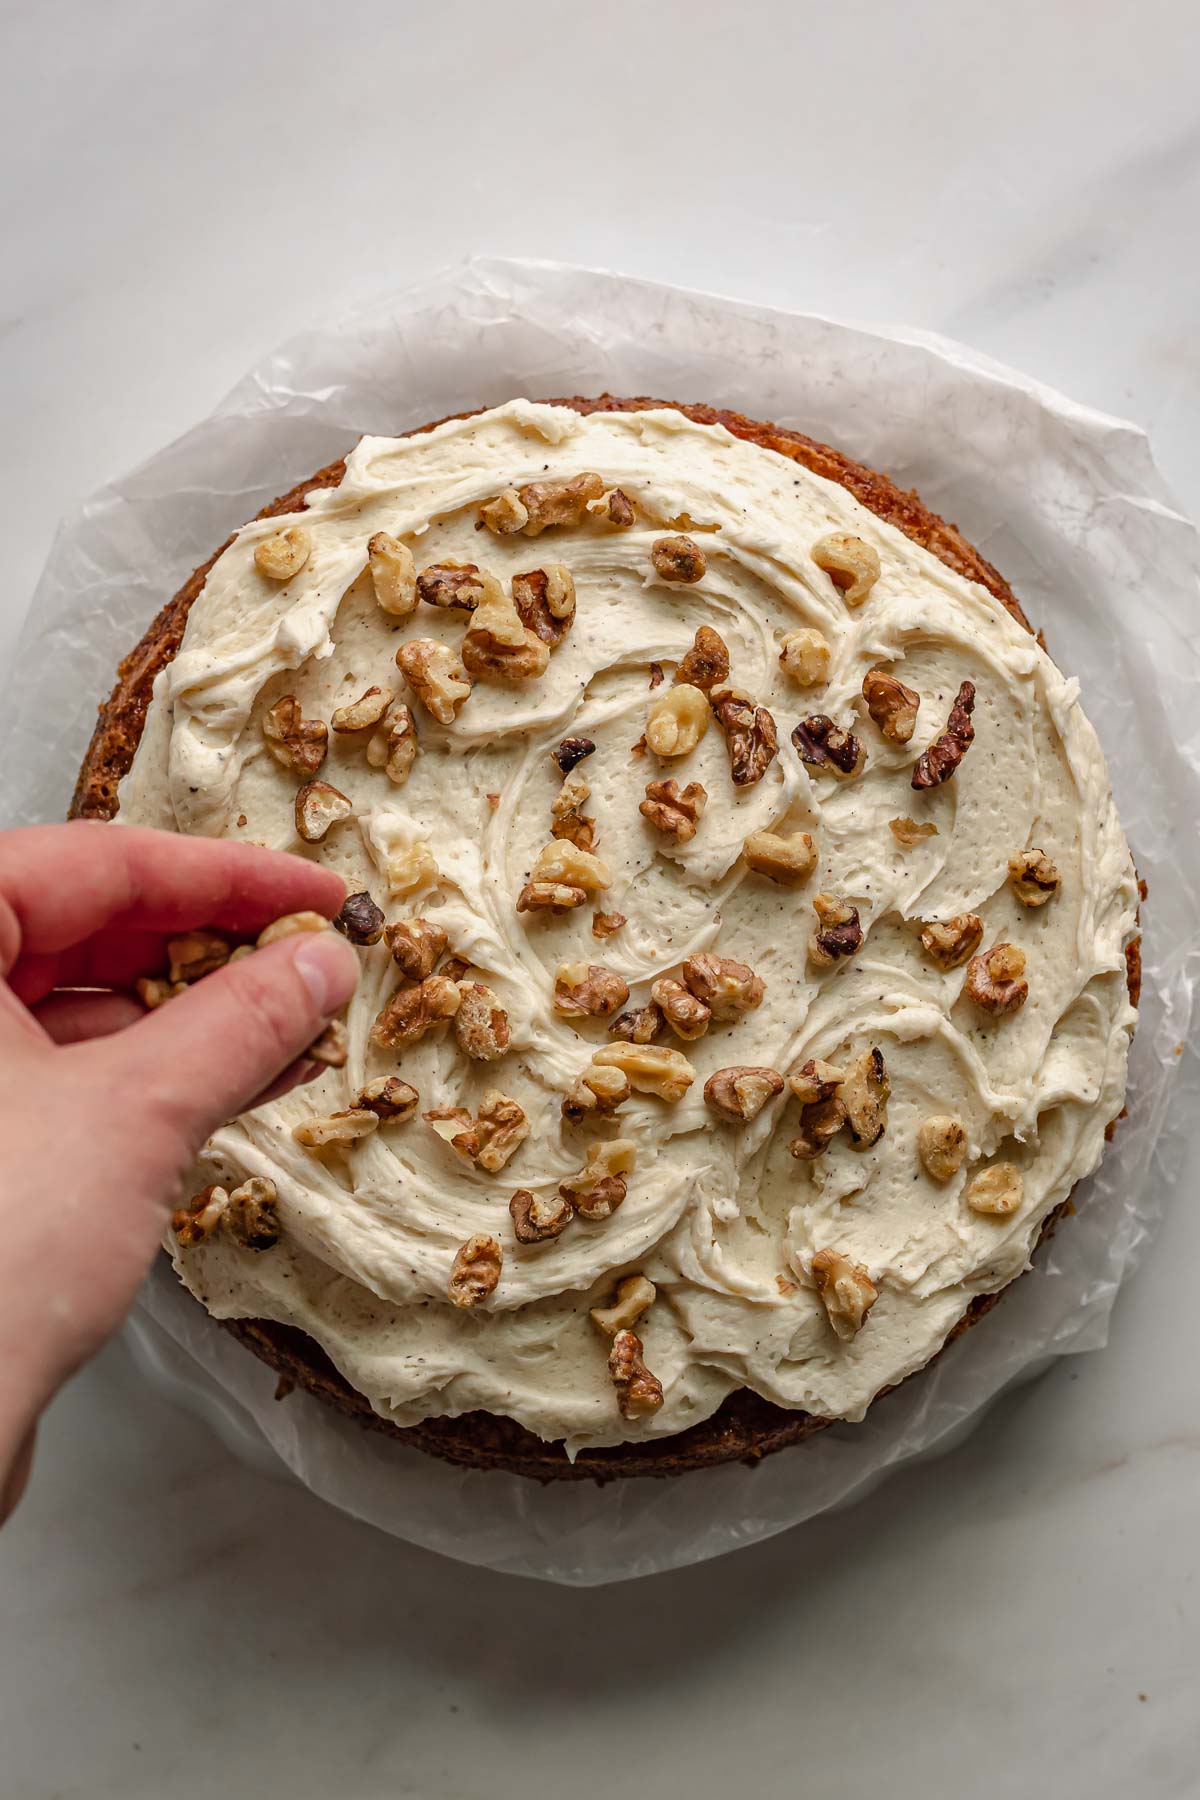 A hand sprinkles on chopped pecans to the frosting.